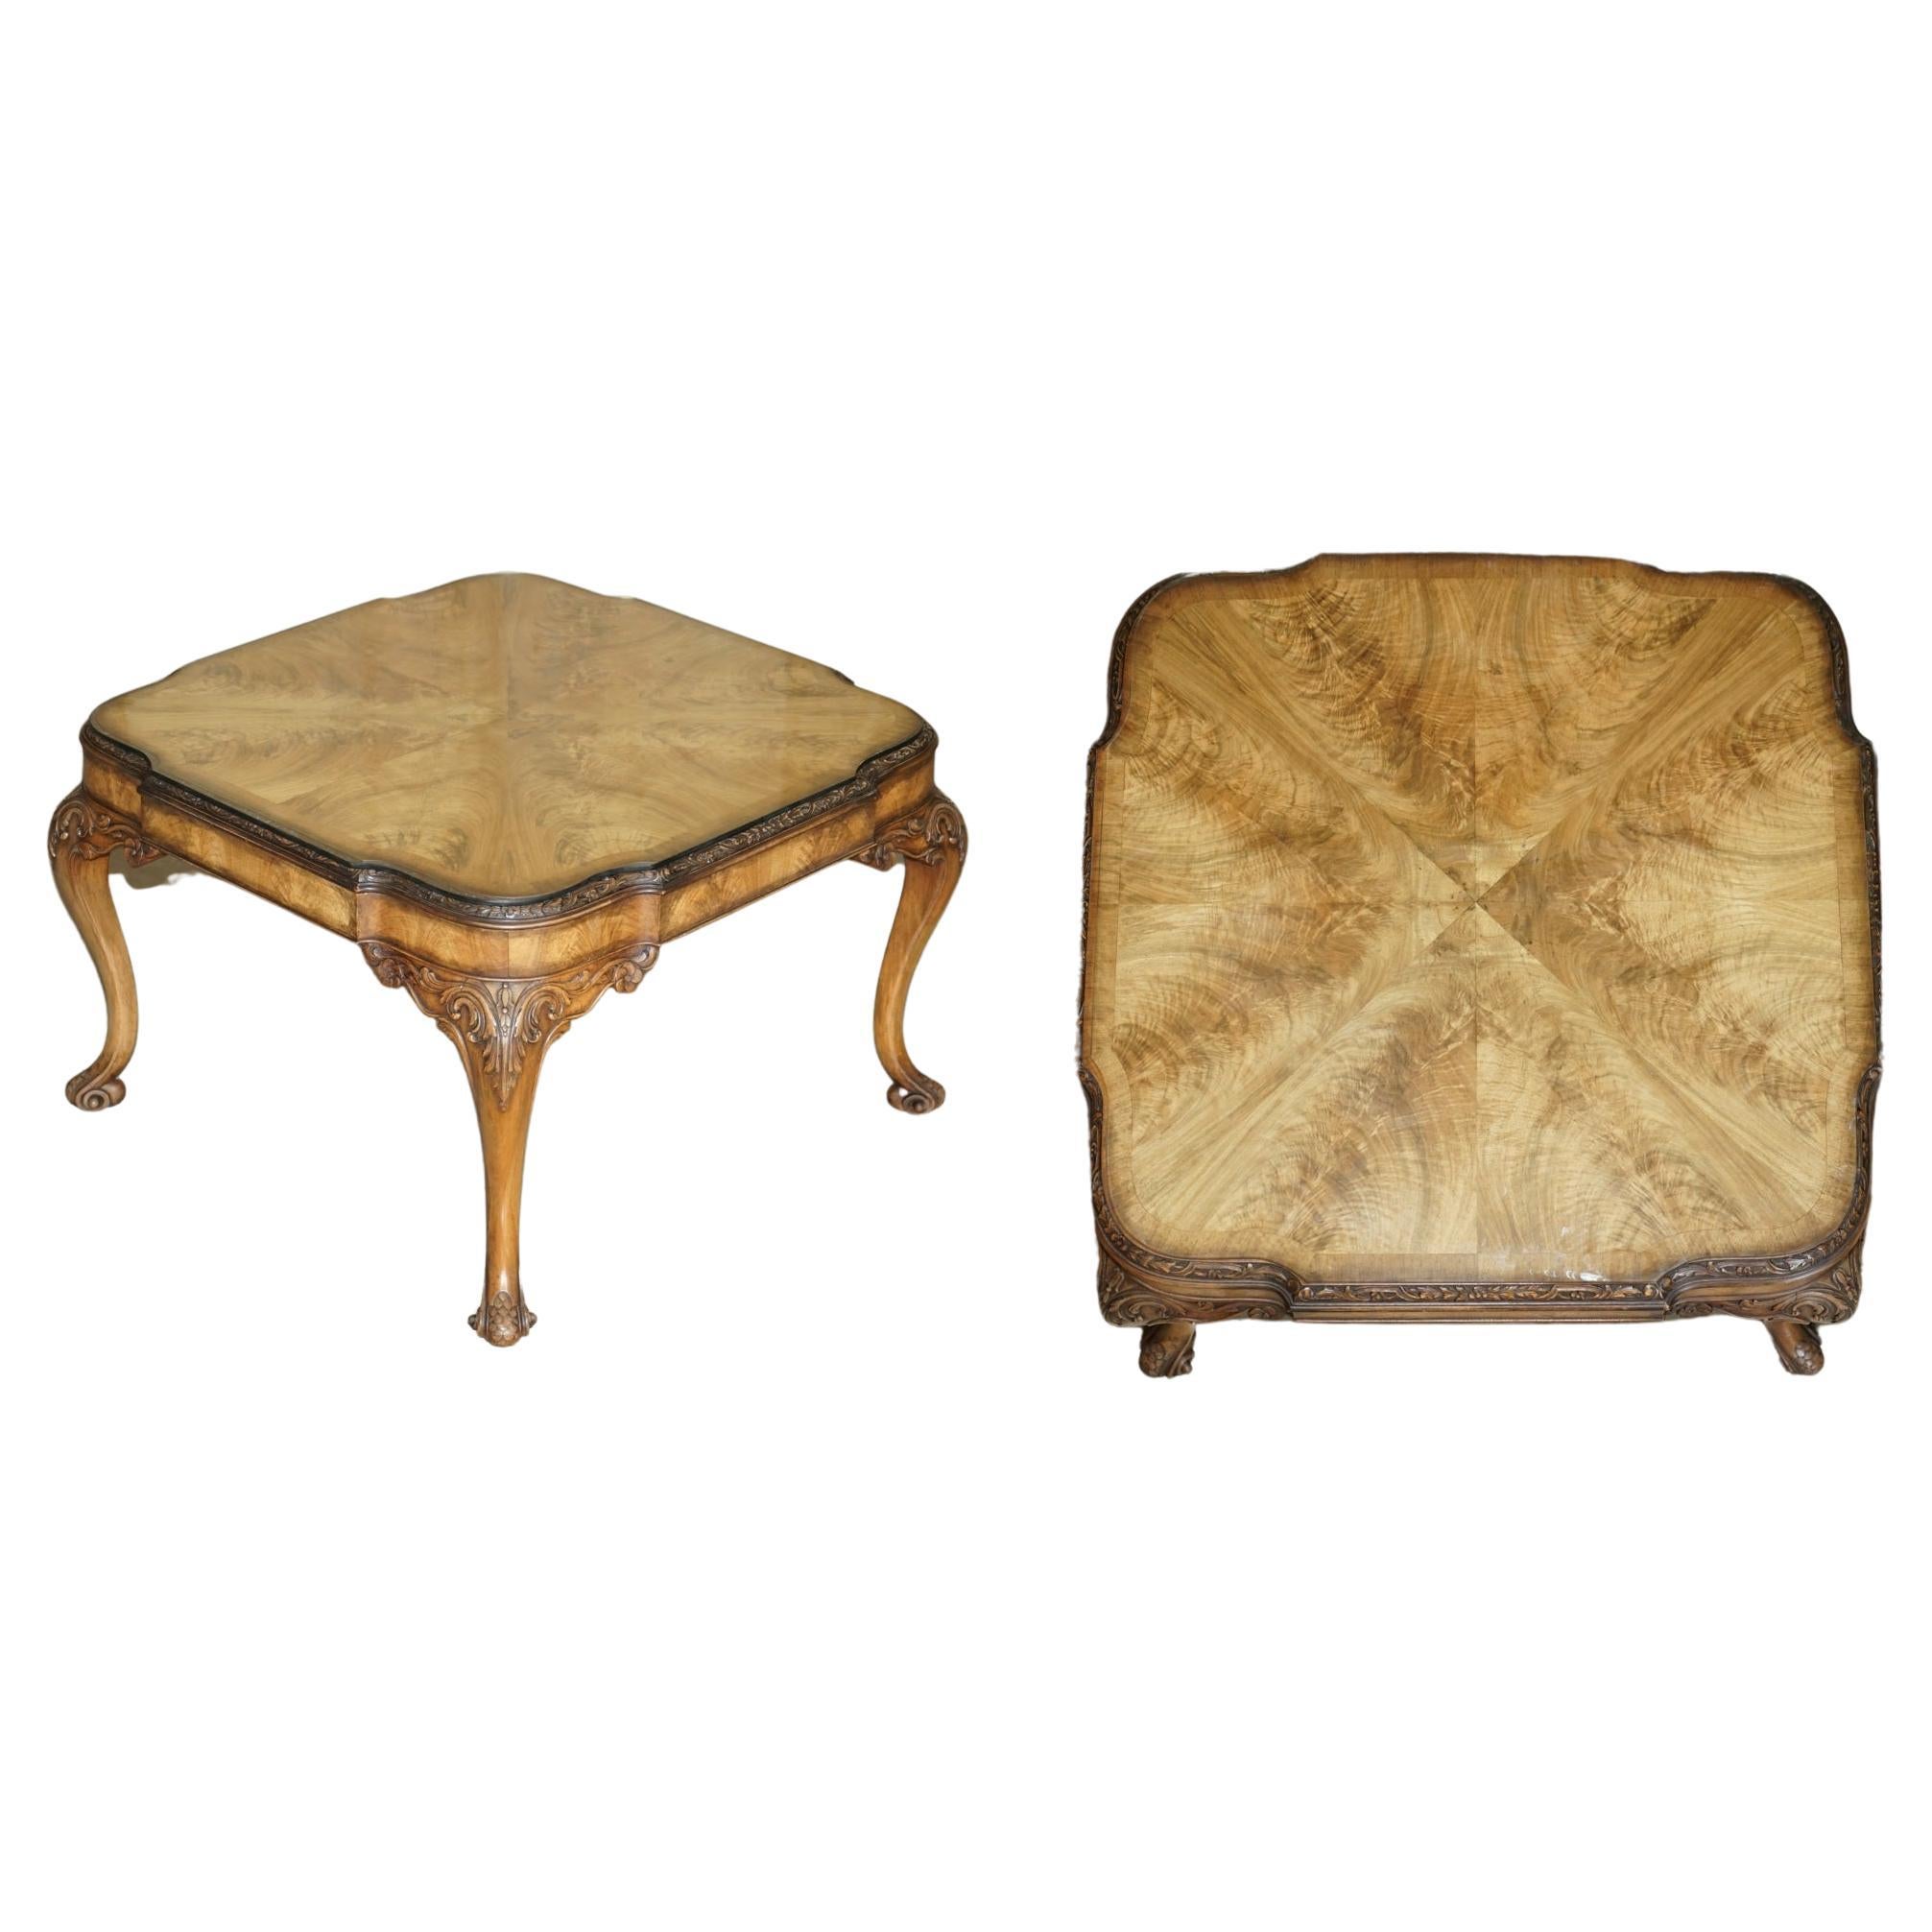 Exquisite Burr Walnut Coffee Cocktail Table with Ornately Carved Cabriole Legs